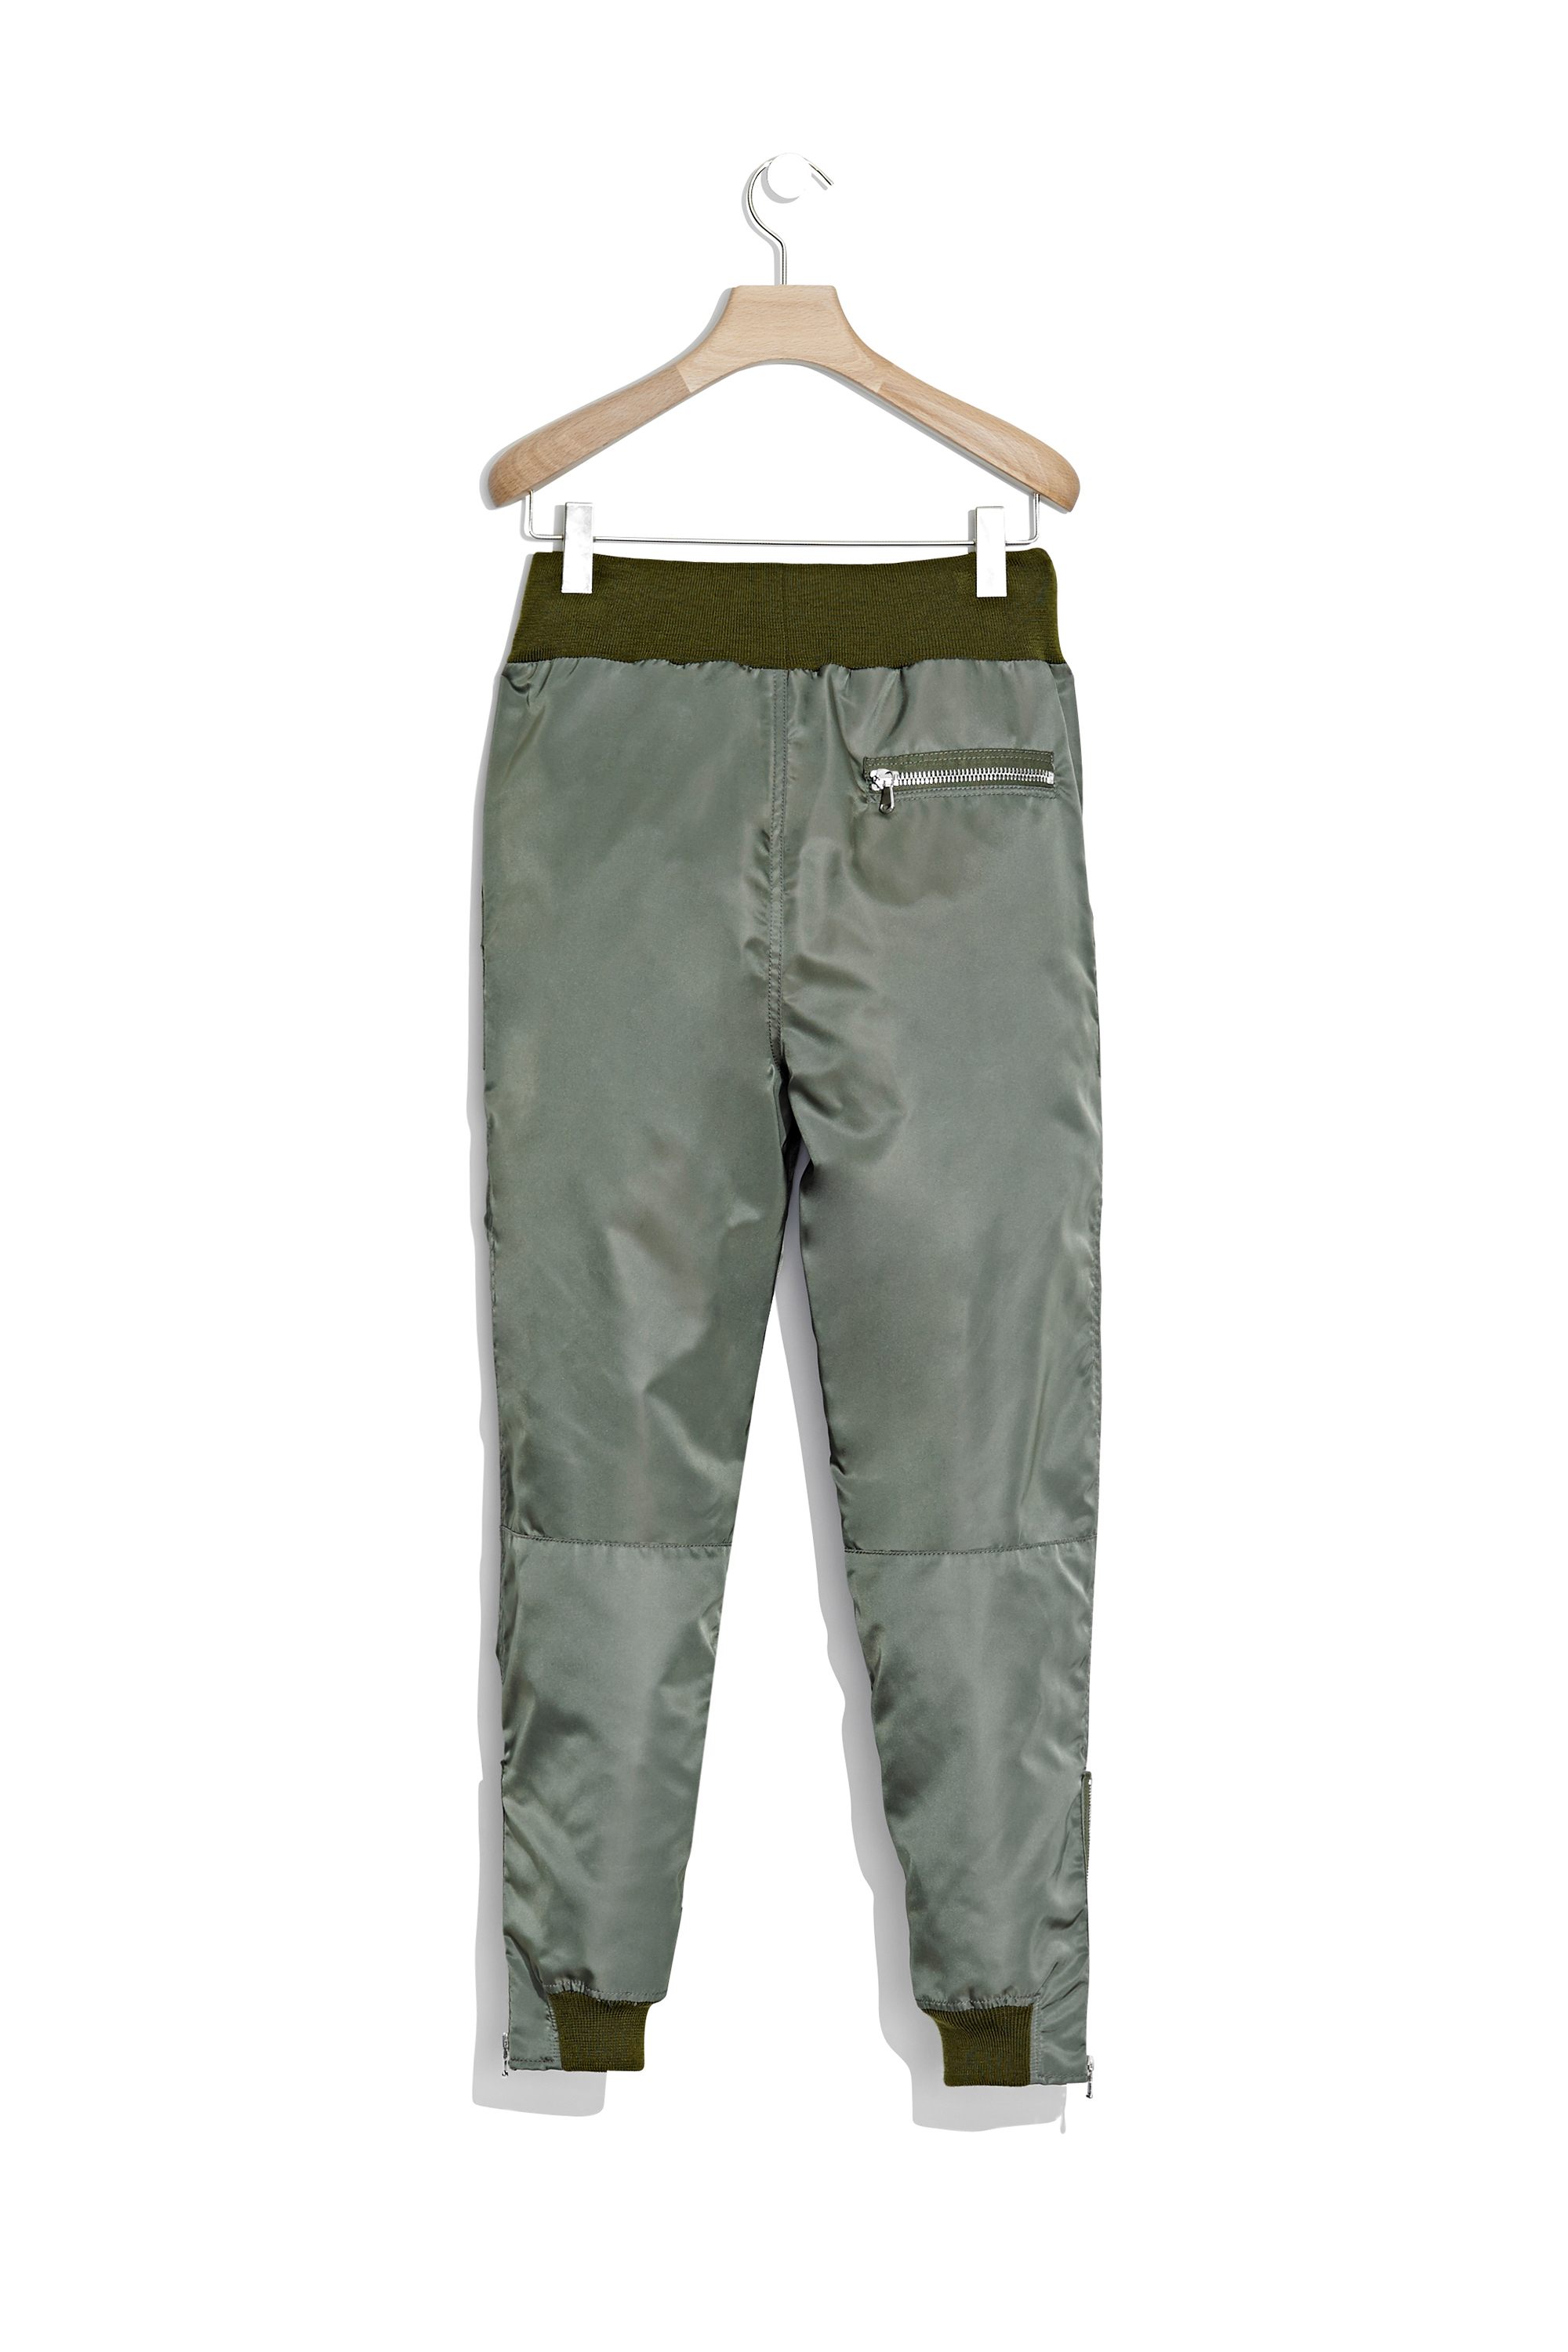 Lyst - 3.1 Phillip Lim Flight Pant With Rib Trim And Exposed Darts in Green